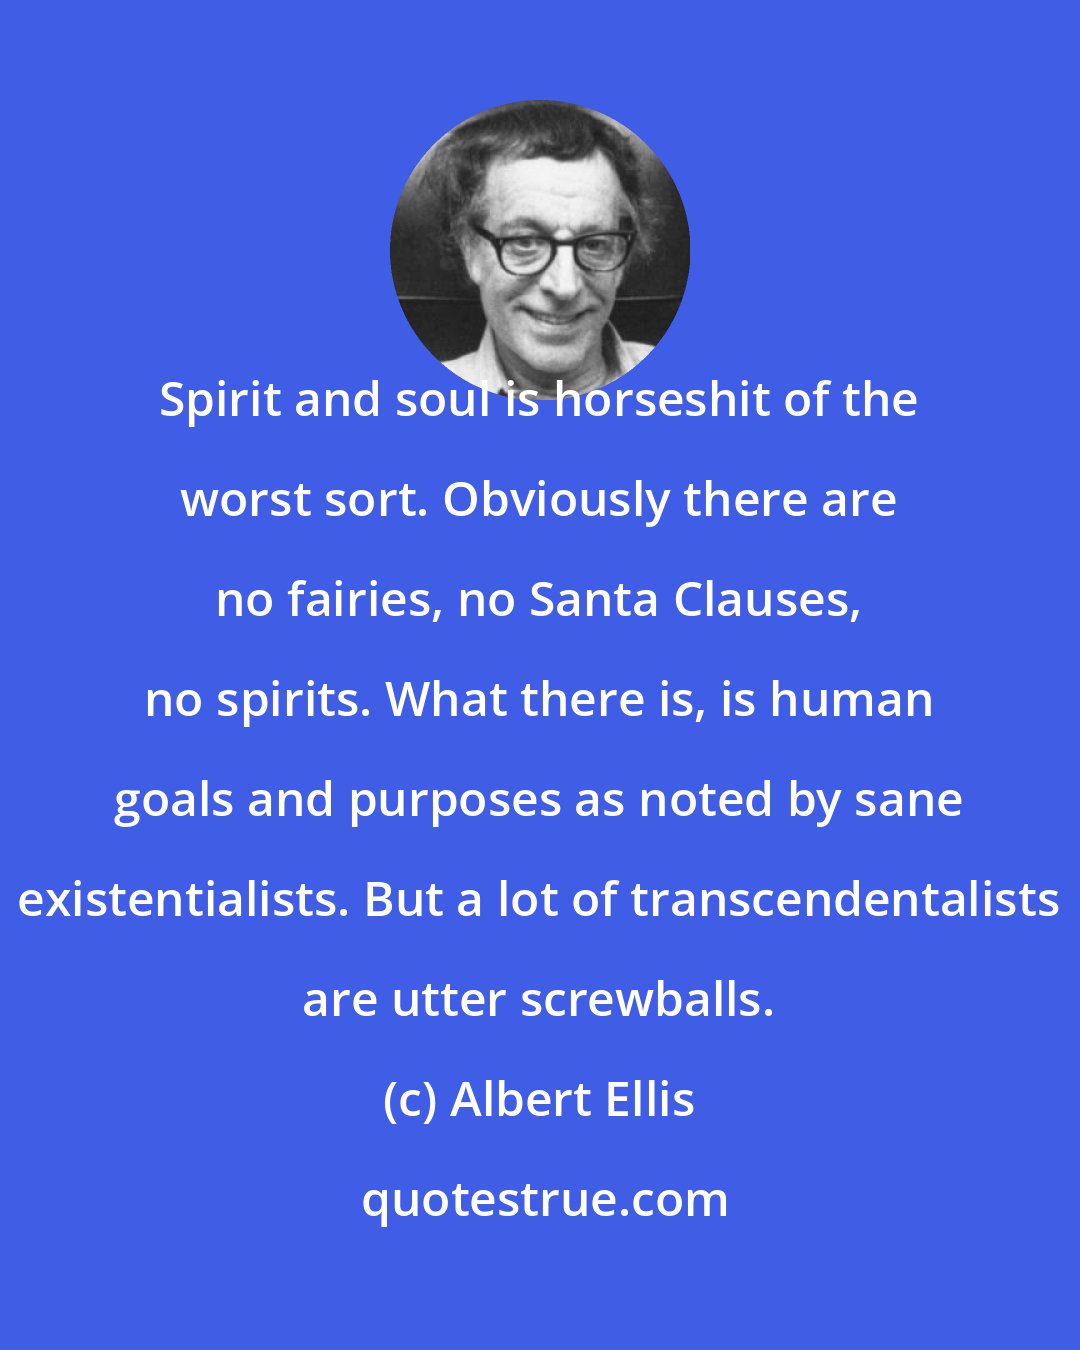 Albert Ellis: Spirit and soul is horseshit of the worst sort. Obviously there are no fairies, no Santa Clauses, no spirits. What there is, is human goals and purposes as noted by sane existentialists. But a lot of transcendentalists are utter screwballs.